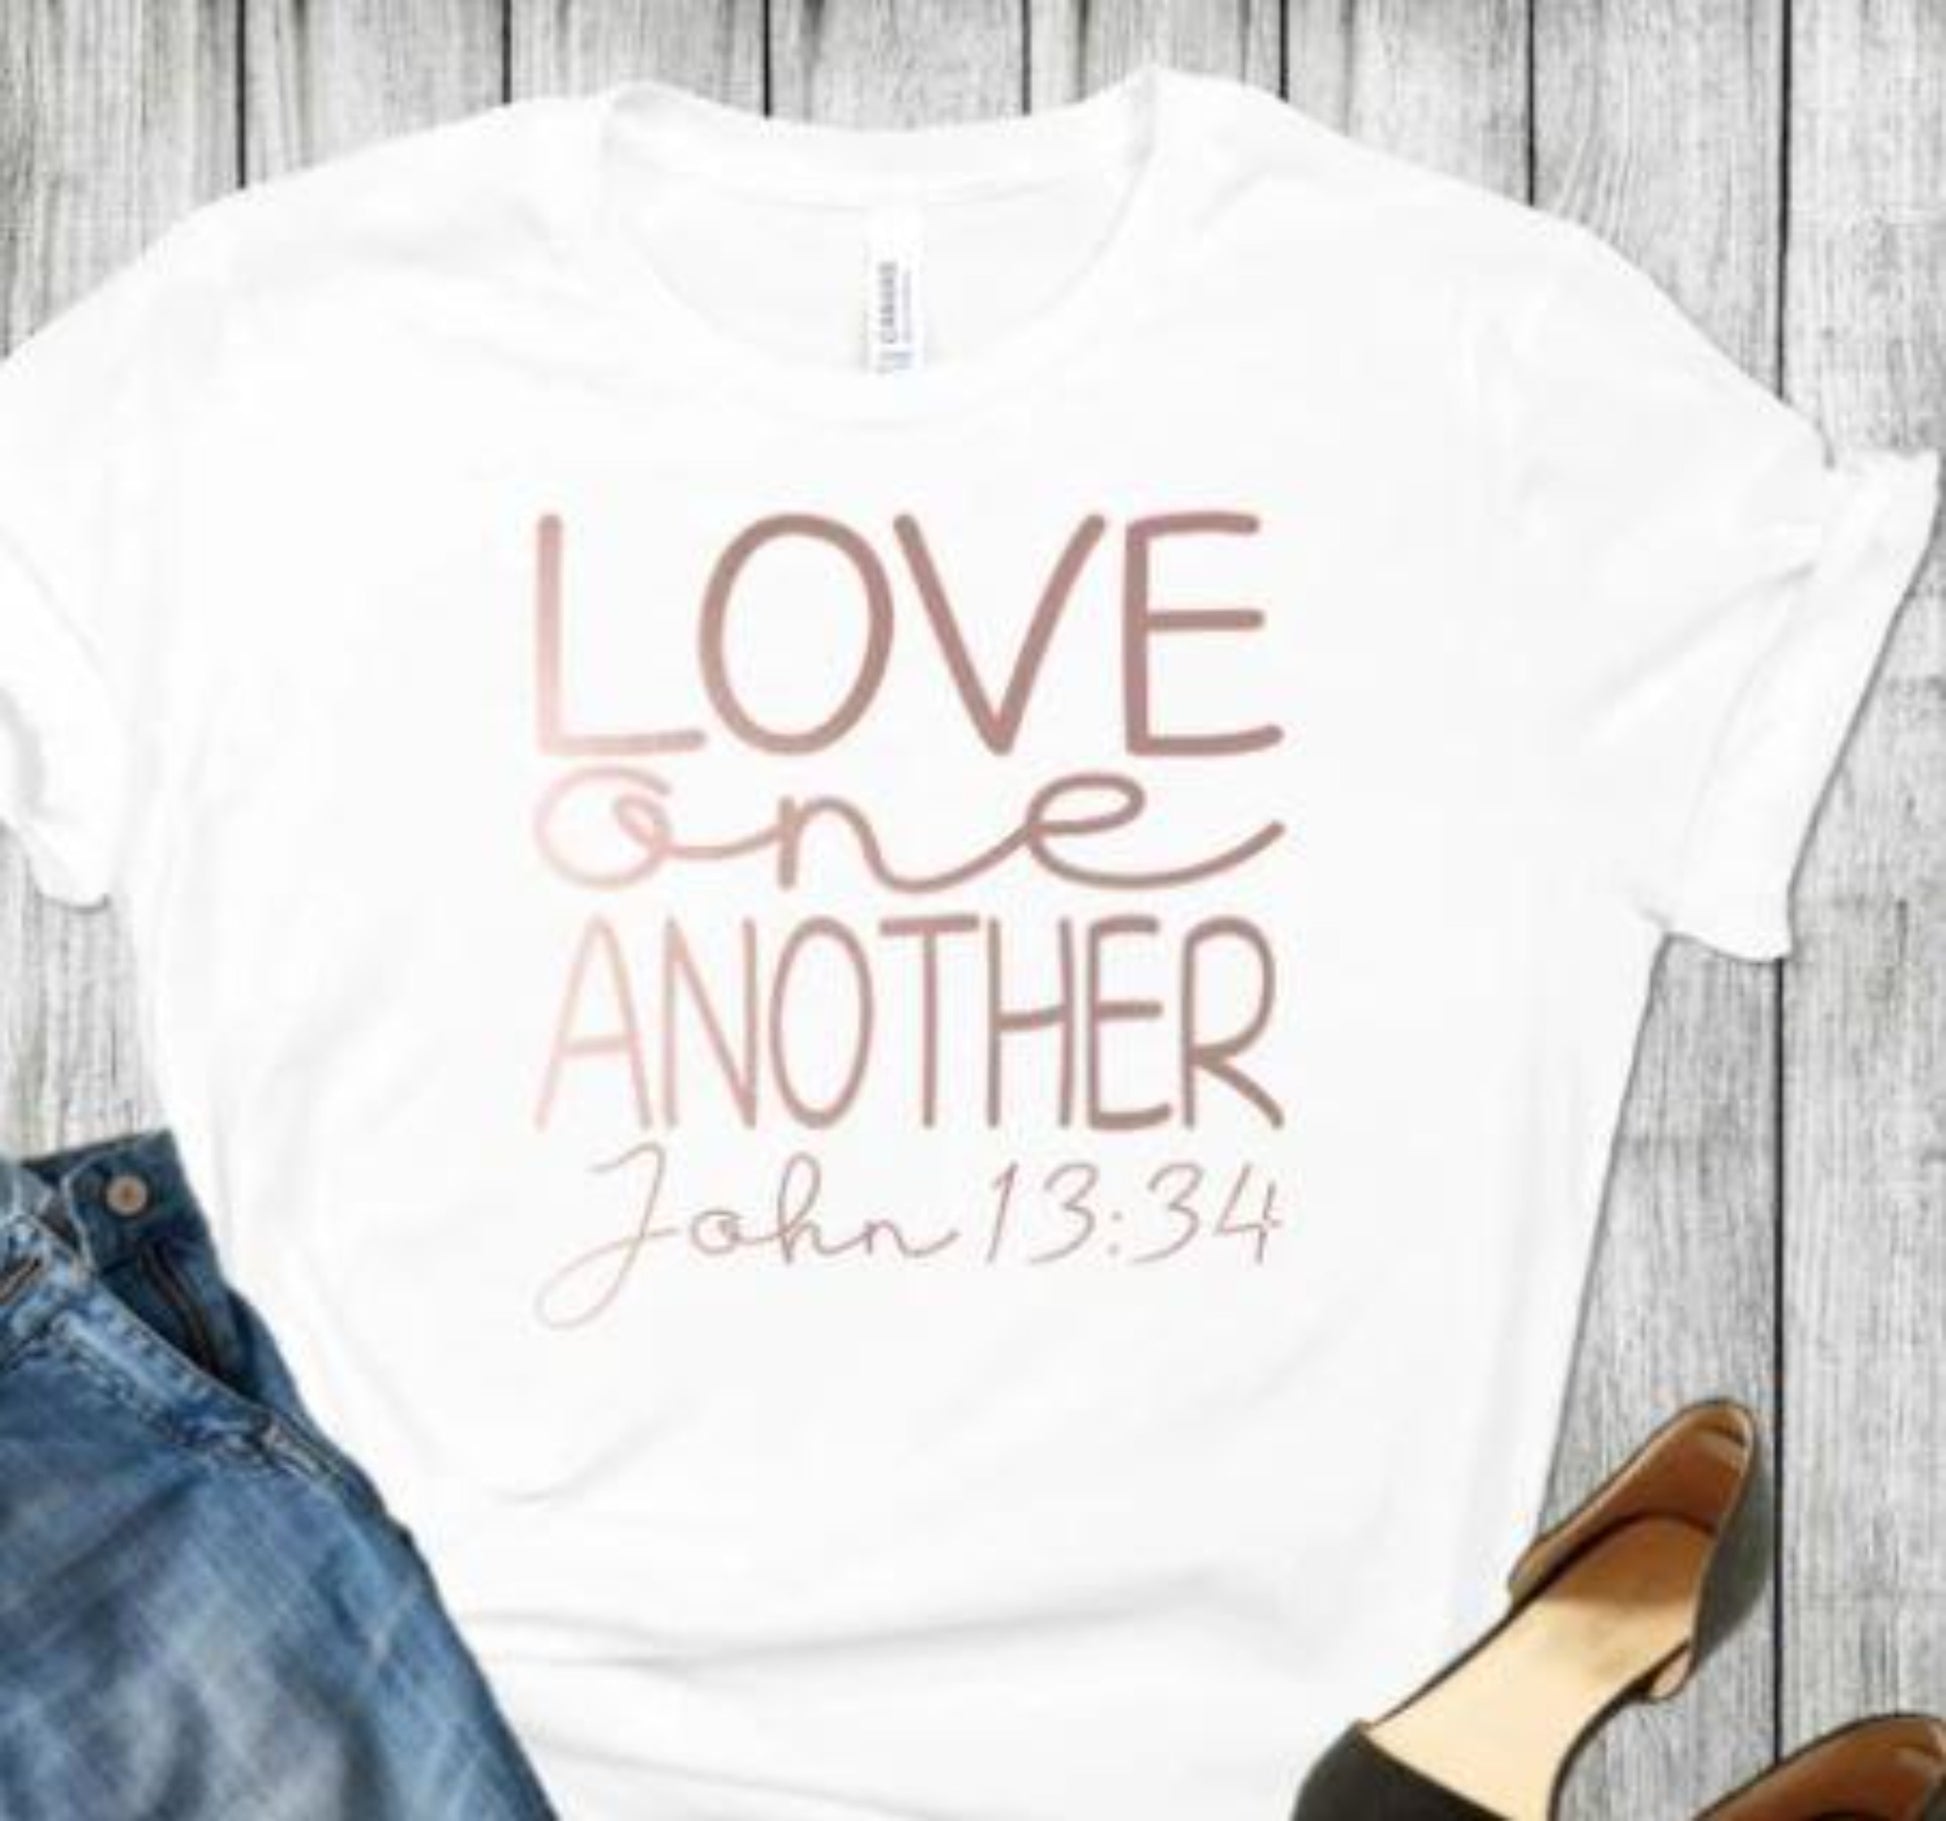 love_one_another specialty tee bible_verse shirt comfortable wear everyday tshirt